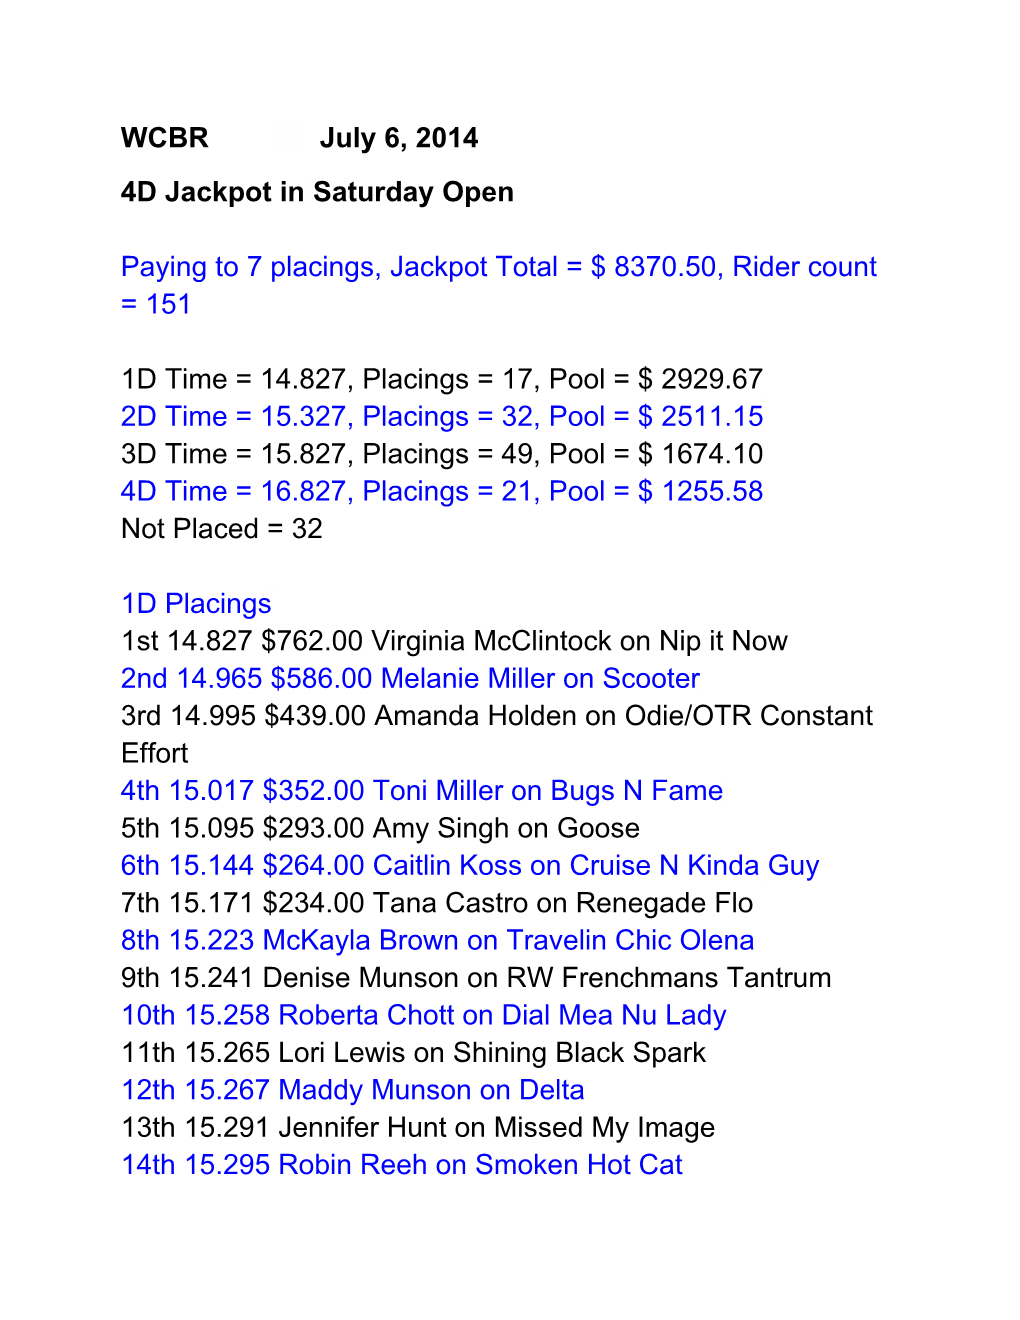 4D Jackpot Insaturdayopen Paying to 7 Placings, Jackpot Total = $ 8370.50, Rider Count